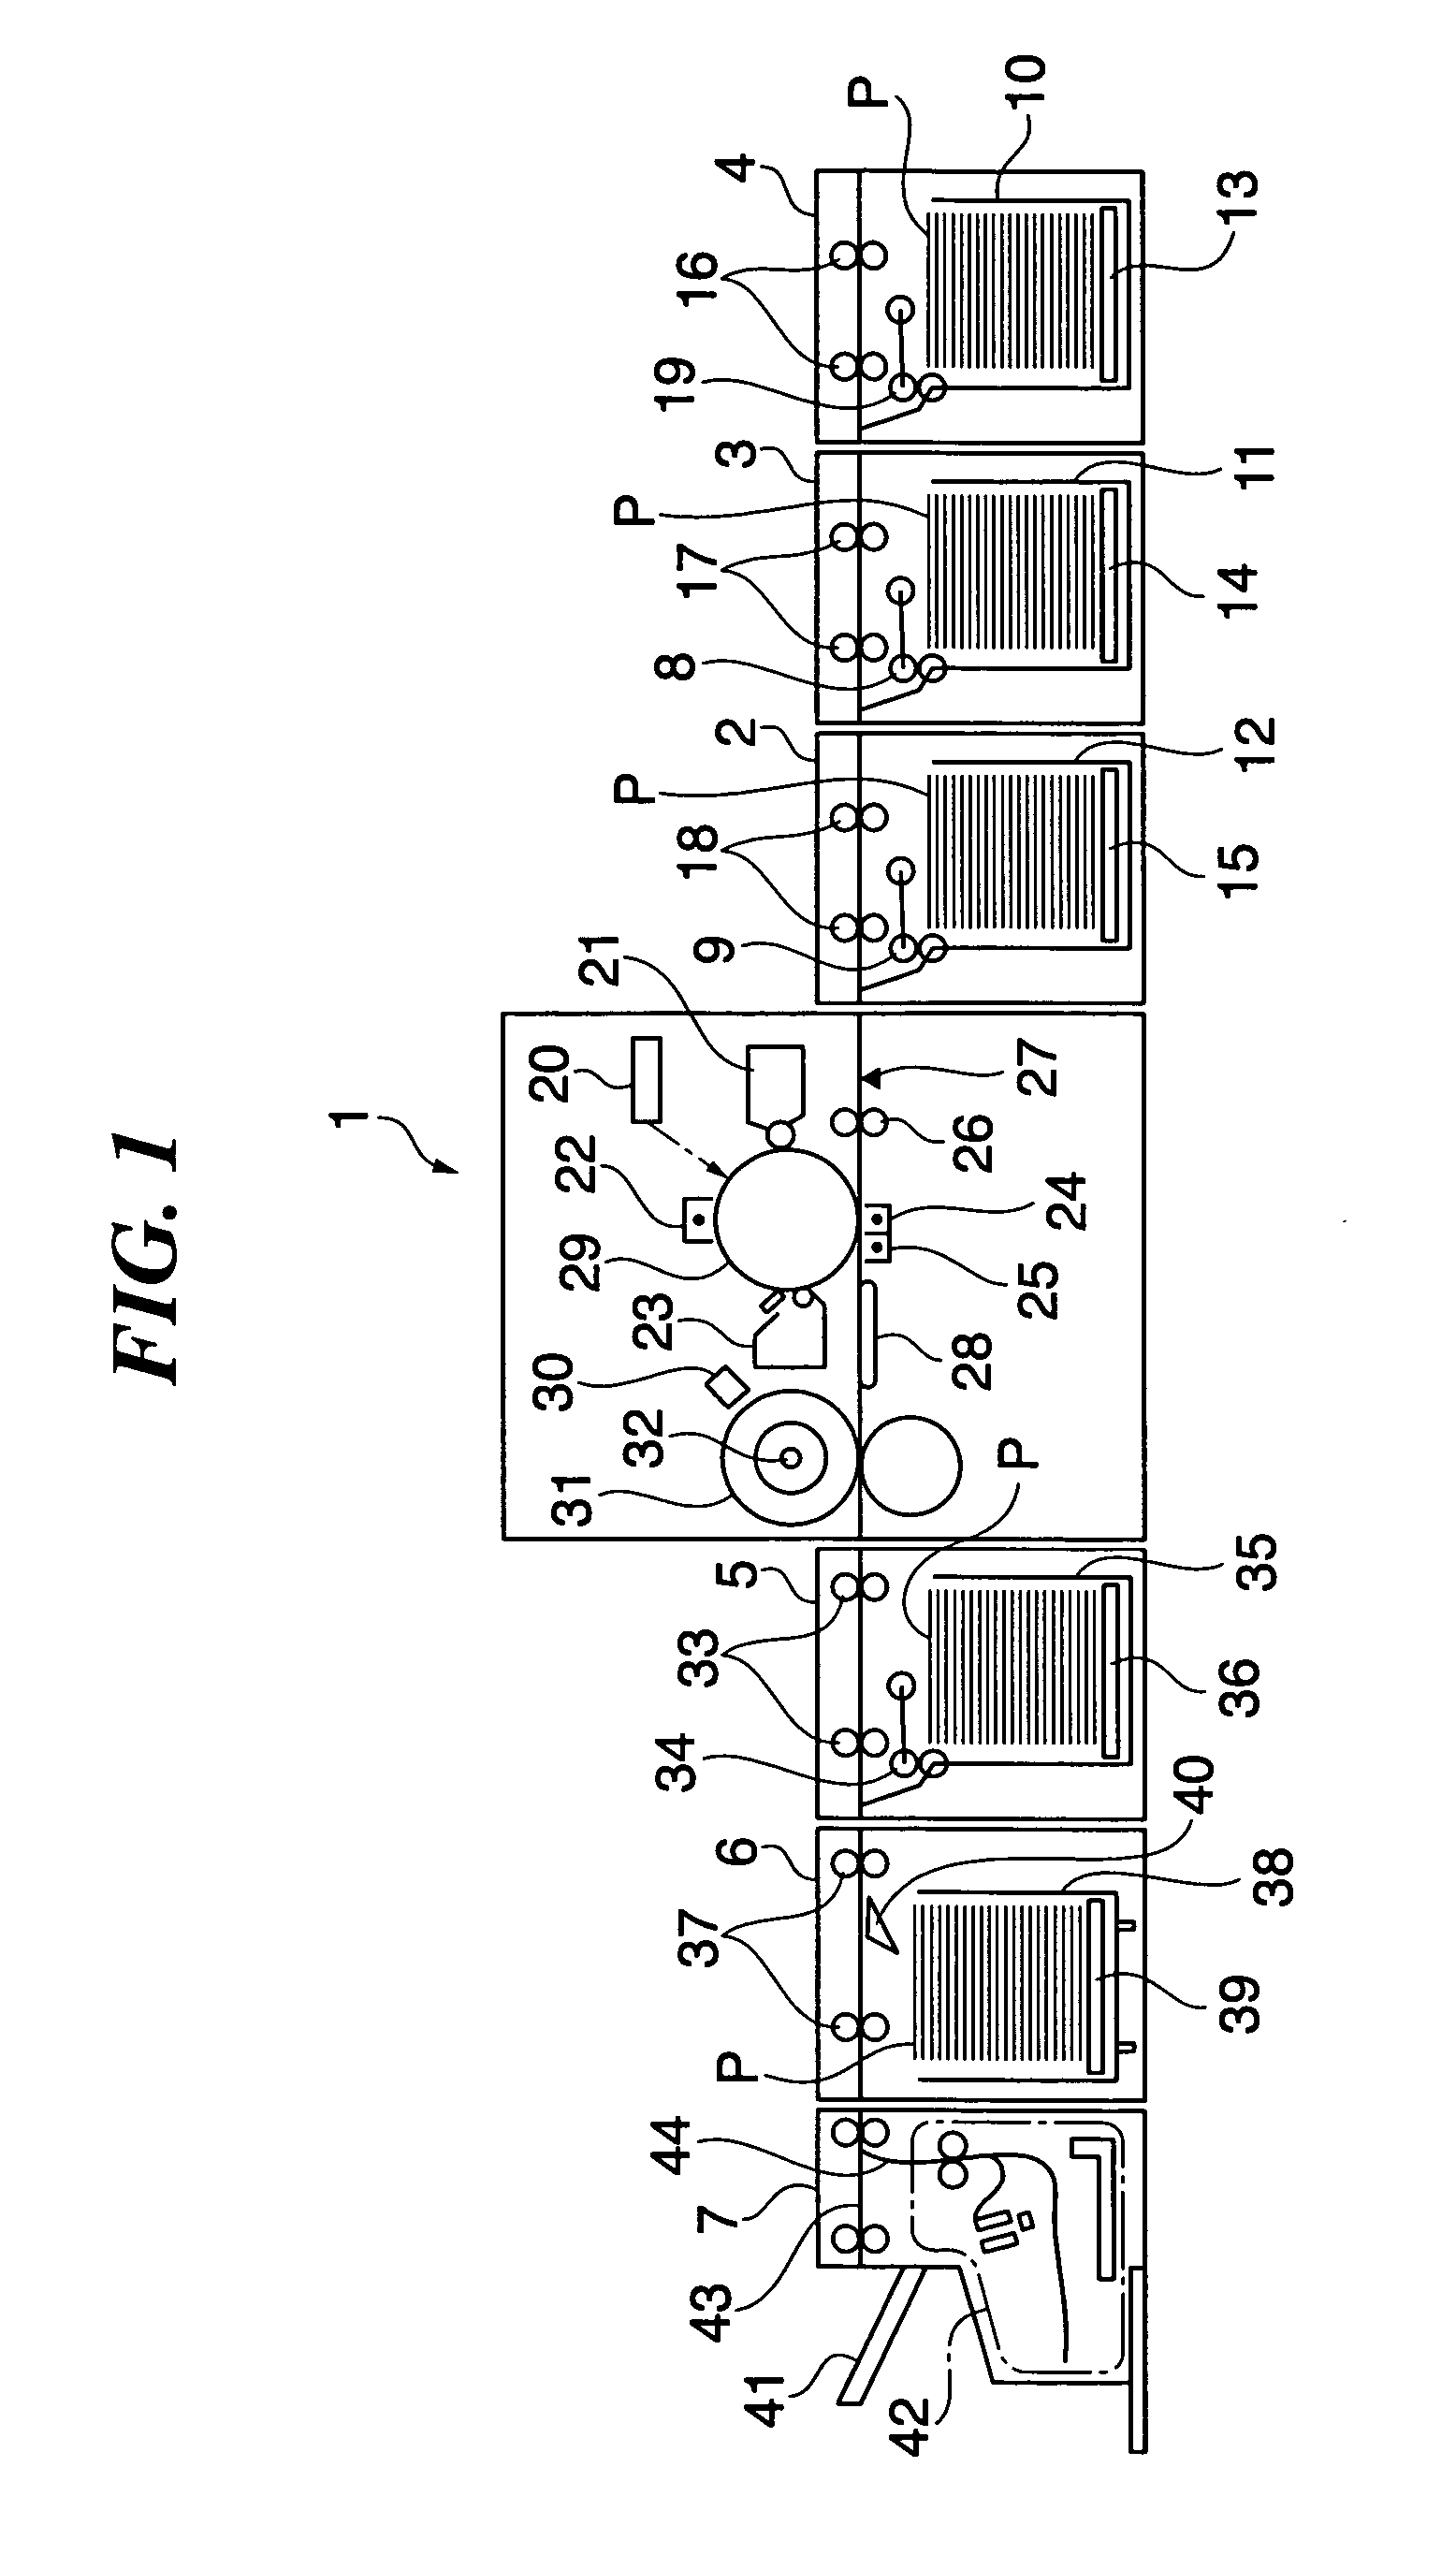 Image forming apparatus, control method therefor, and program for implementing the control method